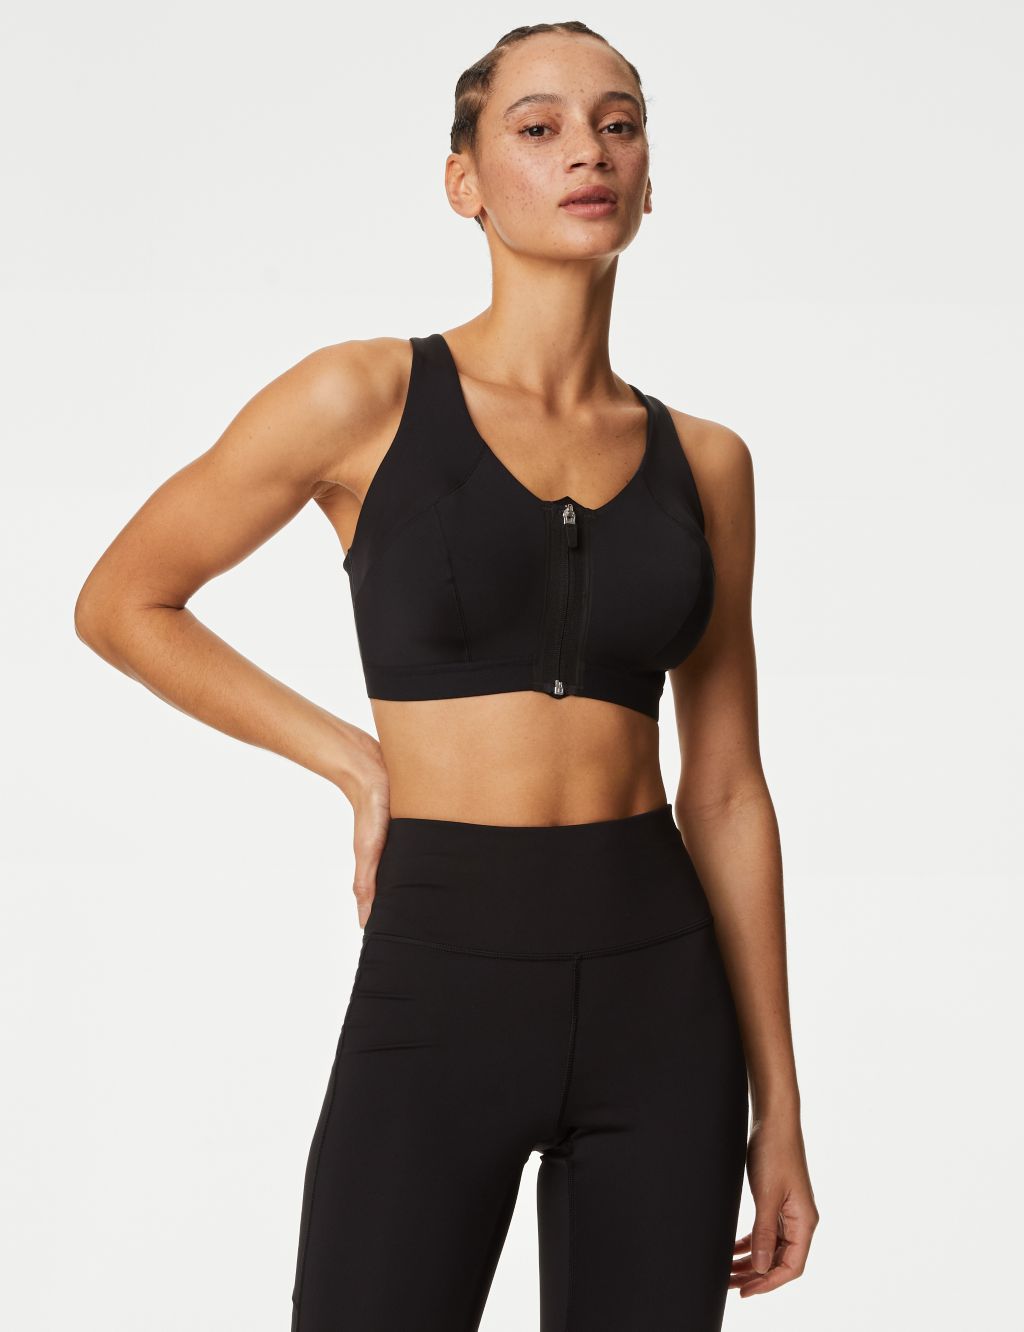 Are you always on the search for a comfy and super supportive sports bra?  The Betts Fit Sports Bra is a on…